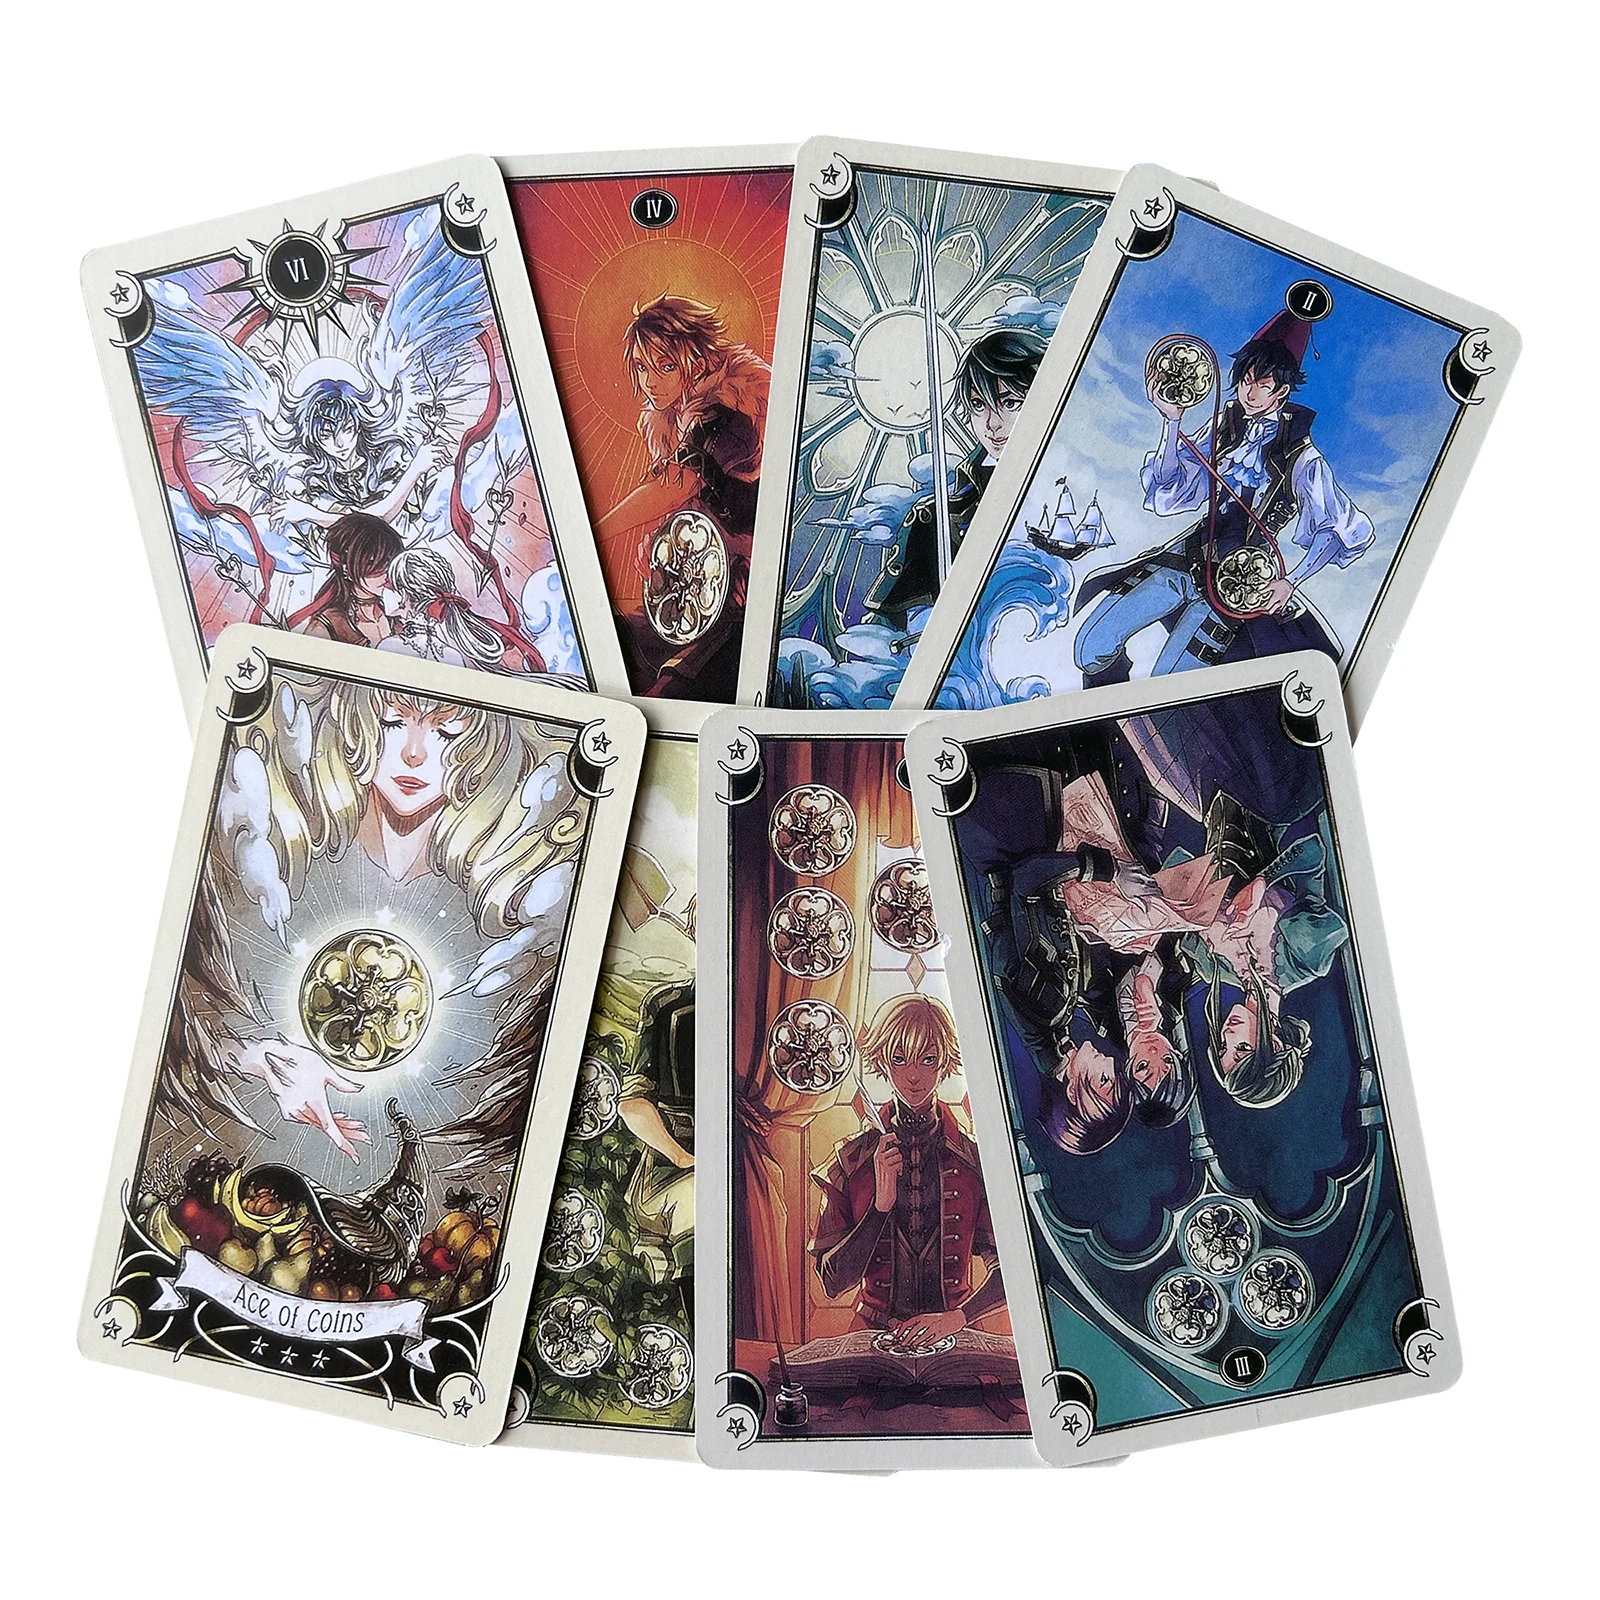 Hot Sell Tarot Cards 12x7 Board Game for Divination Personal Use Tarot Deck Party Games Full English Table Game Outdoor Camping. personal 220v small mini air conditioning for camping tent outdoor